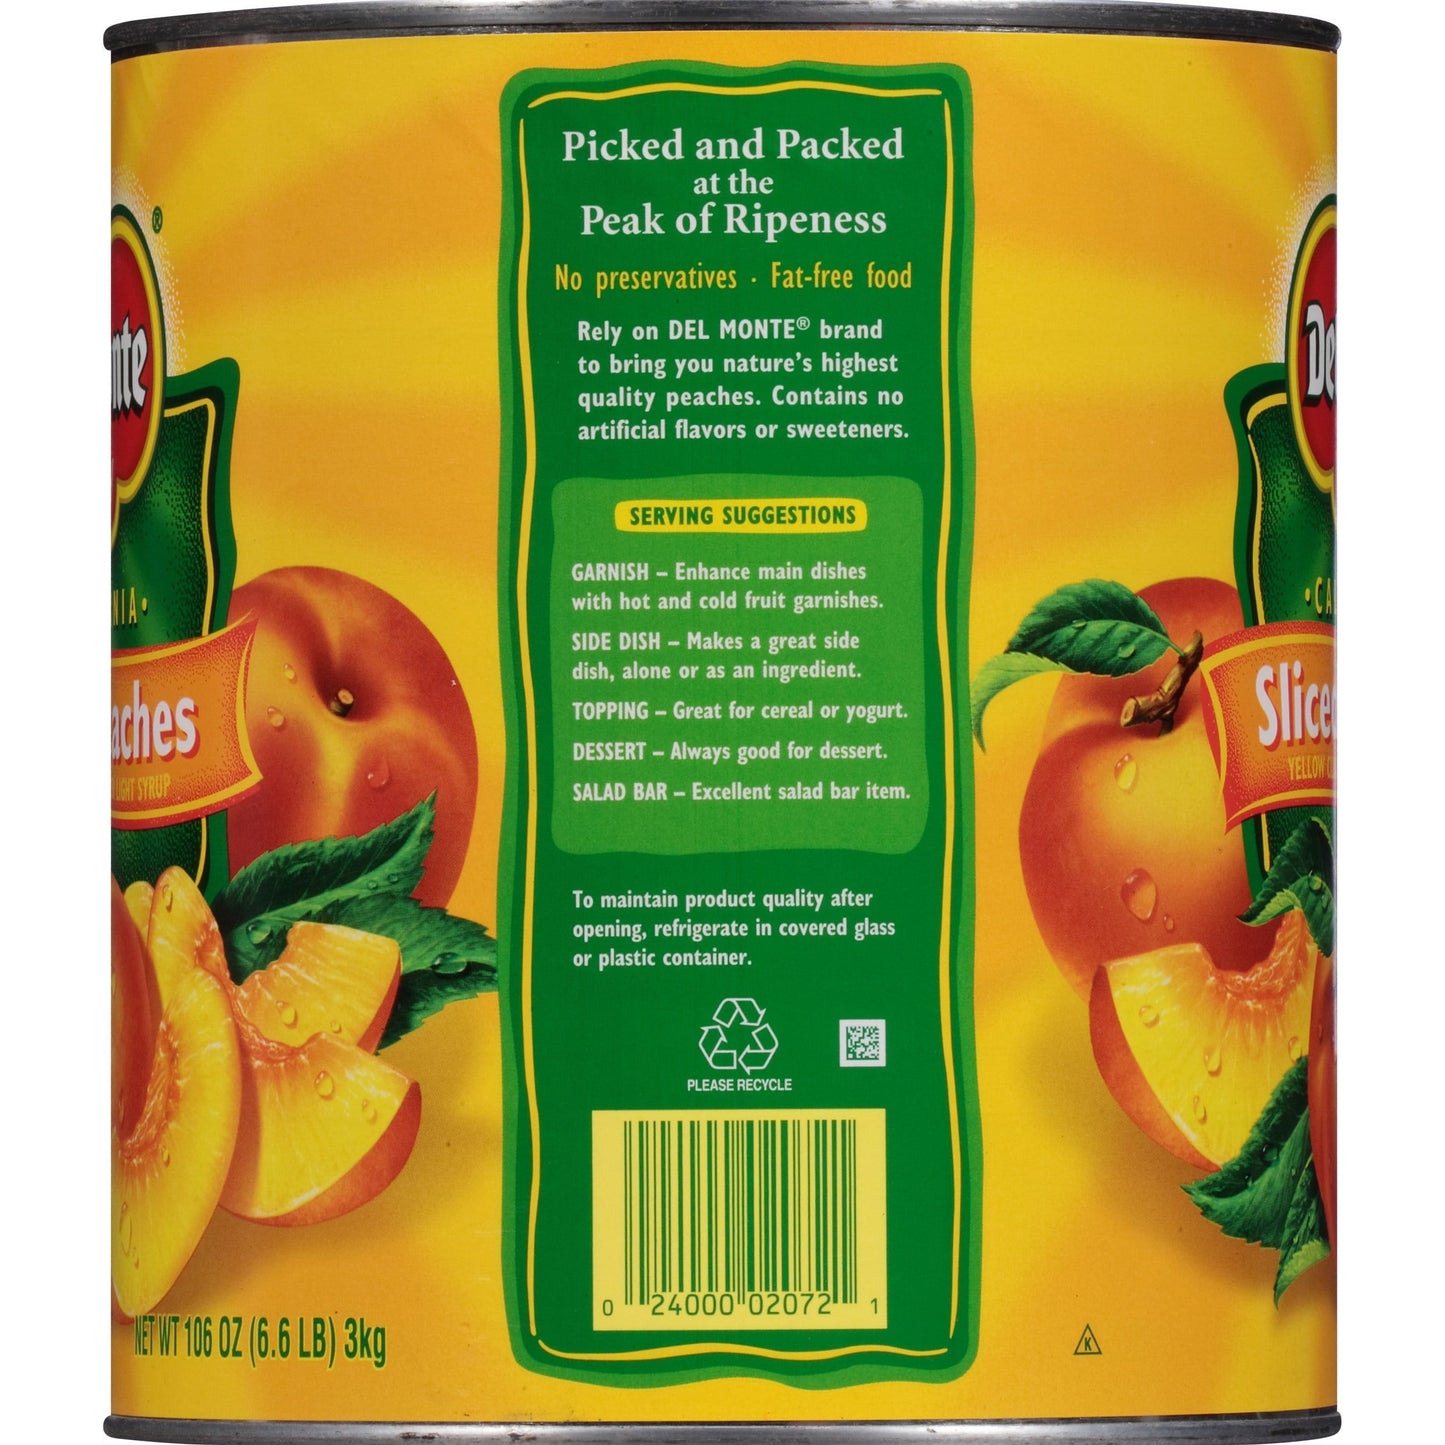 Lite Yellow Cling Sliced Peaches, Canned Fruit, 106 Oz Can